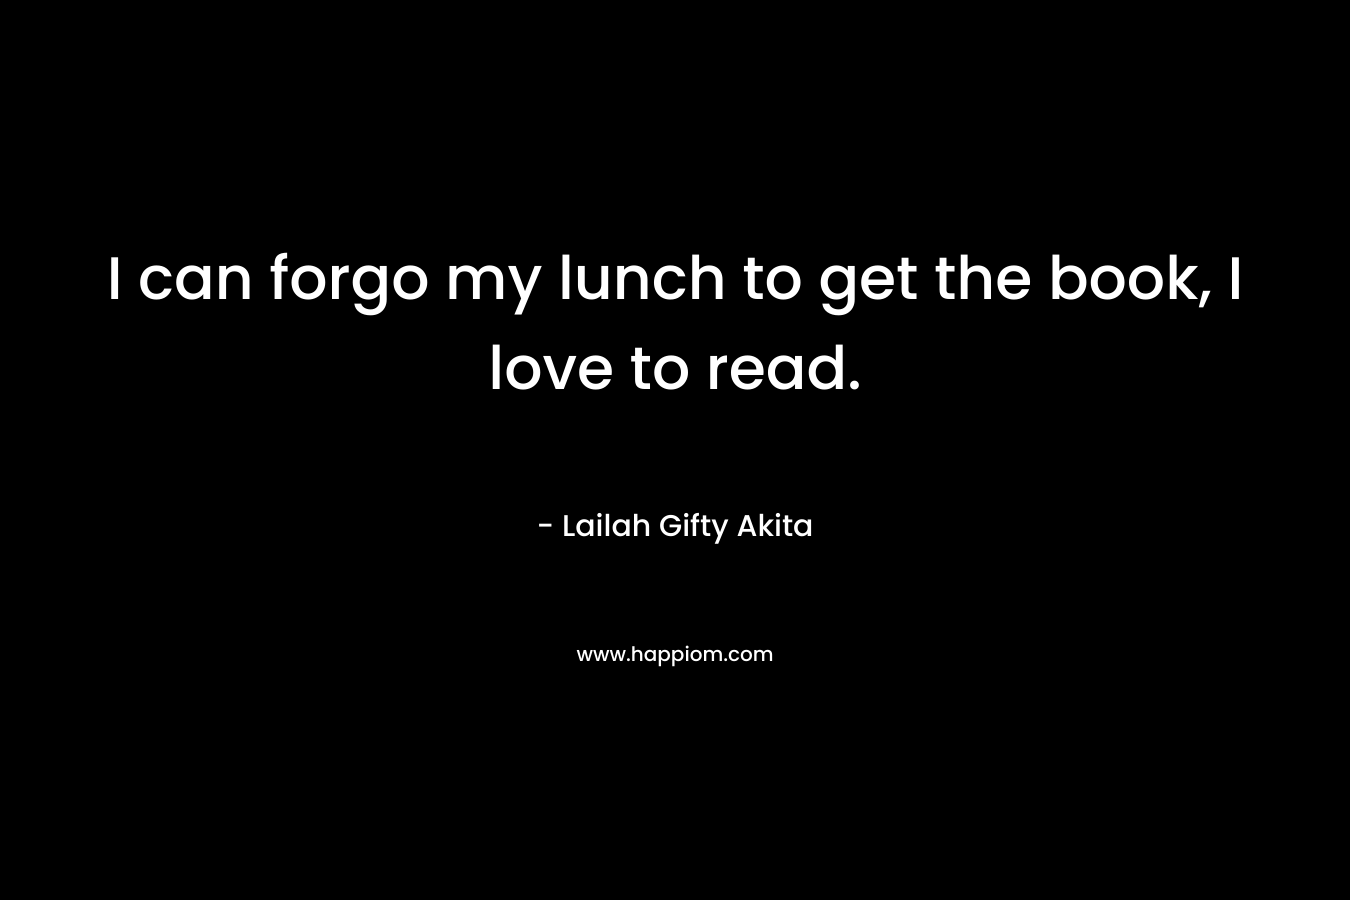 I can forgo my lunch to get the book, I love to read. – Lailah Gifty Akita